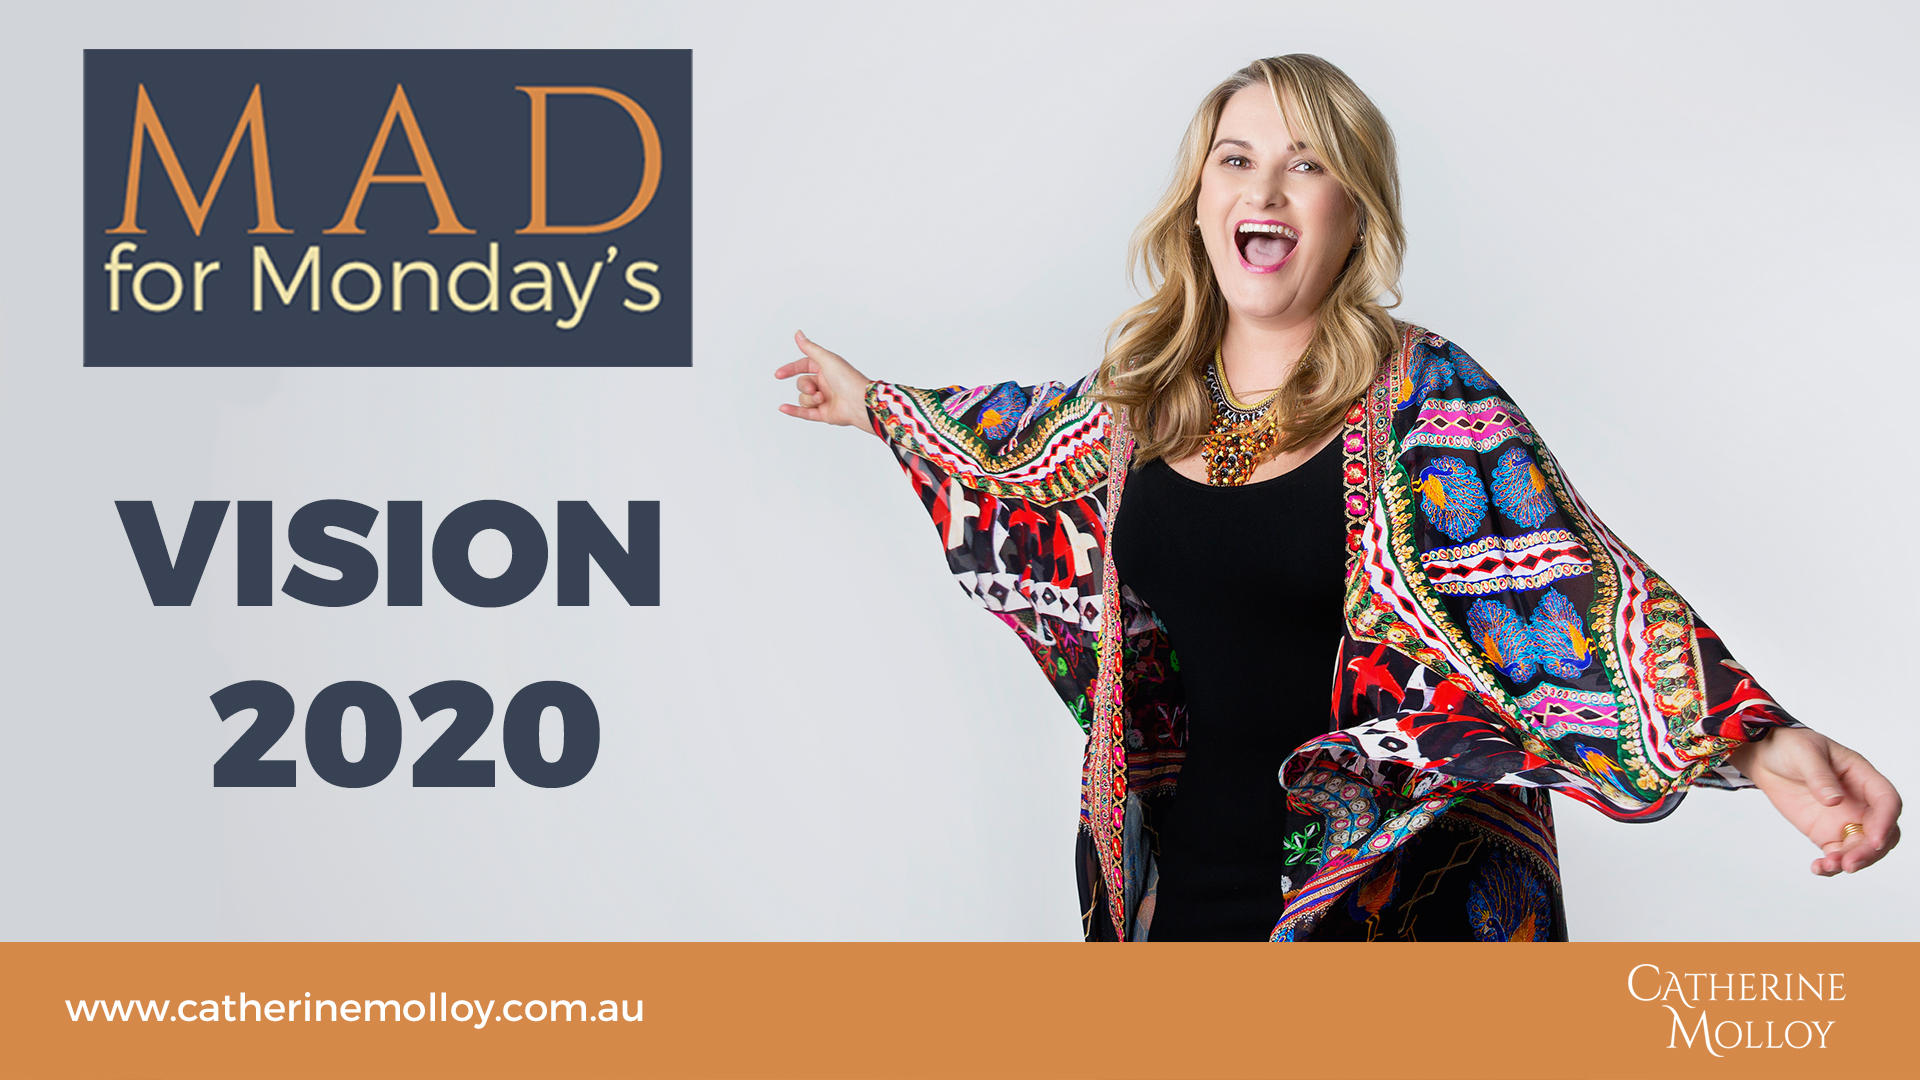 MAD for Monday’s – Vision 2020